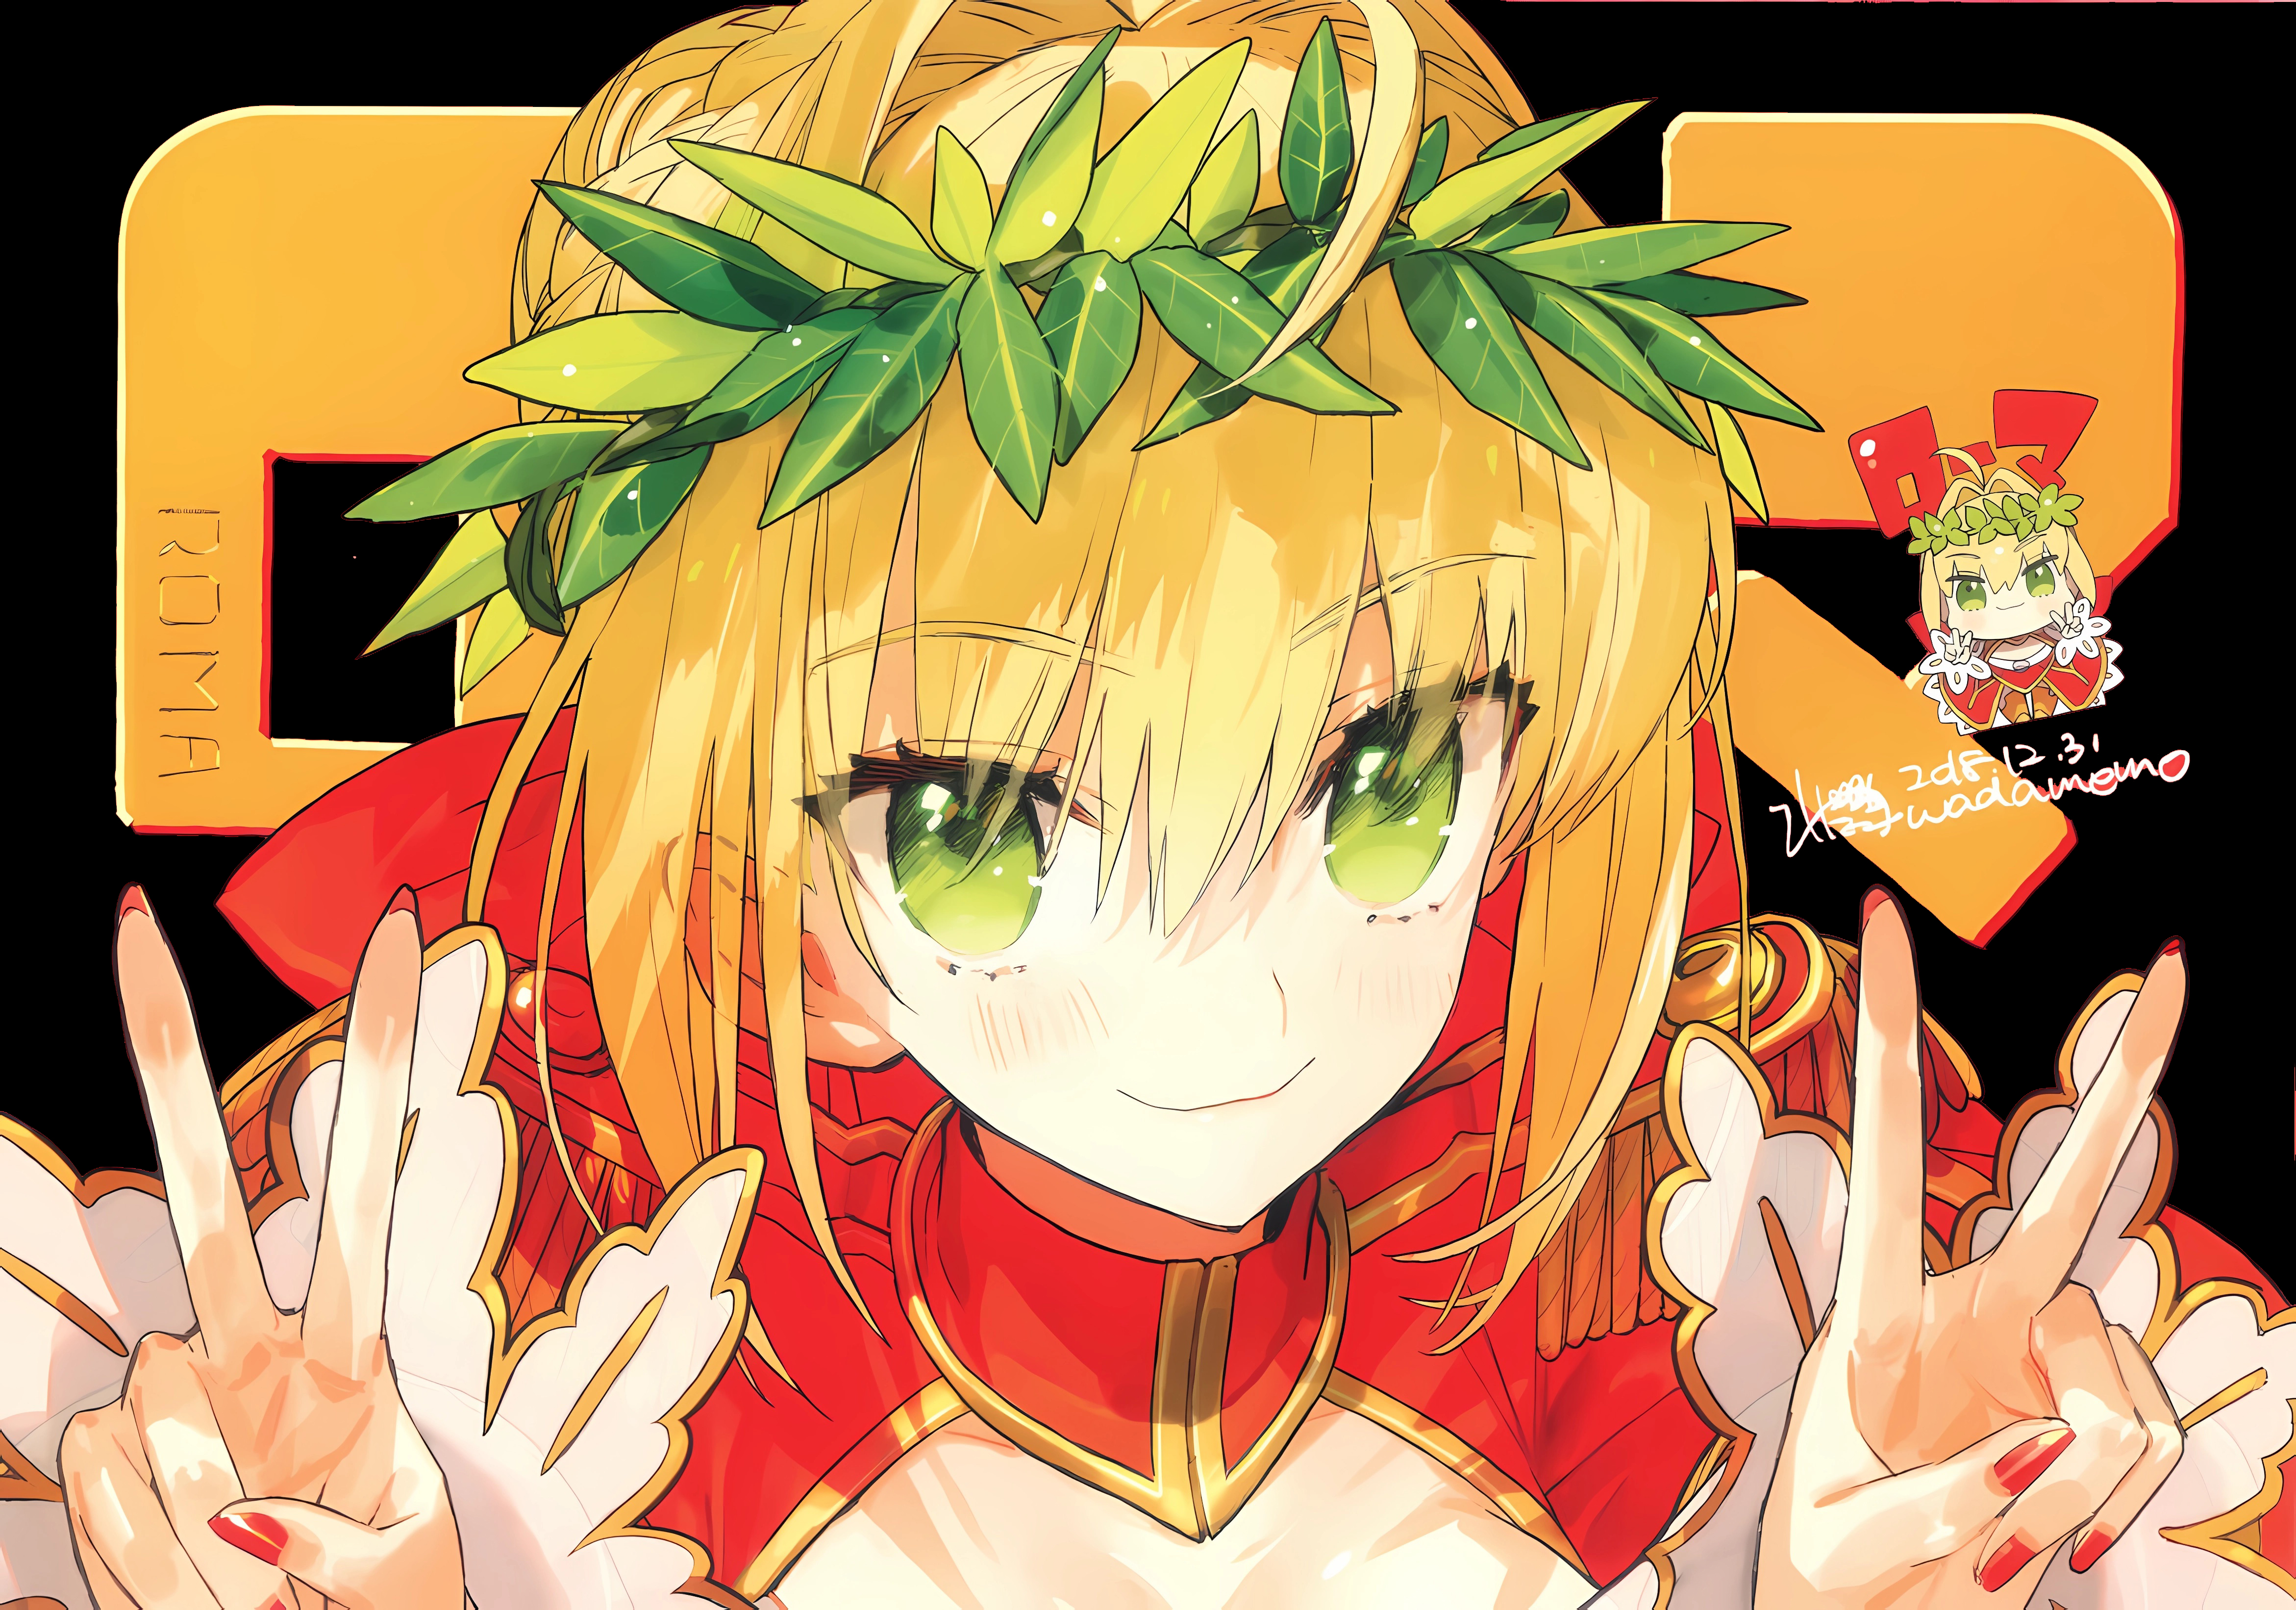 Anime 4684x3284 Nero Claudius Fate/Grand Order Fate/Extra leaves looking at viewer smiling anime girls blonde green eyes peace sign Fate series